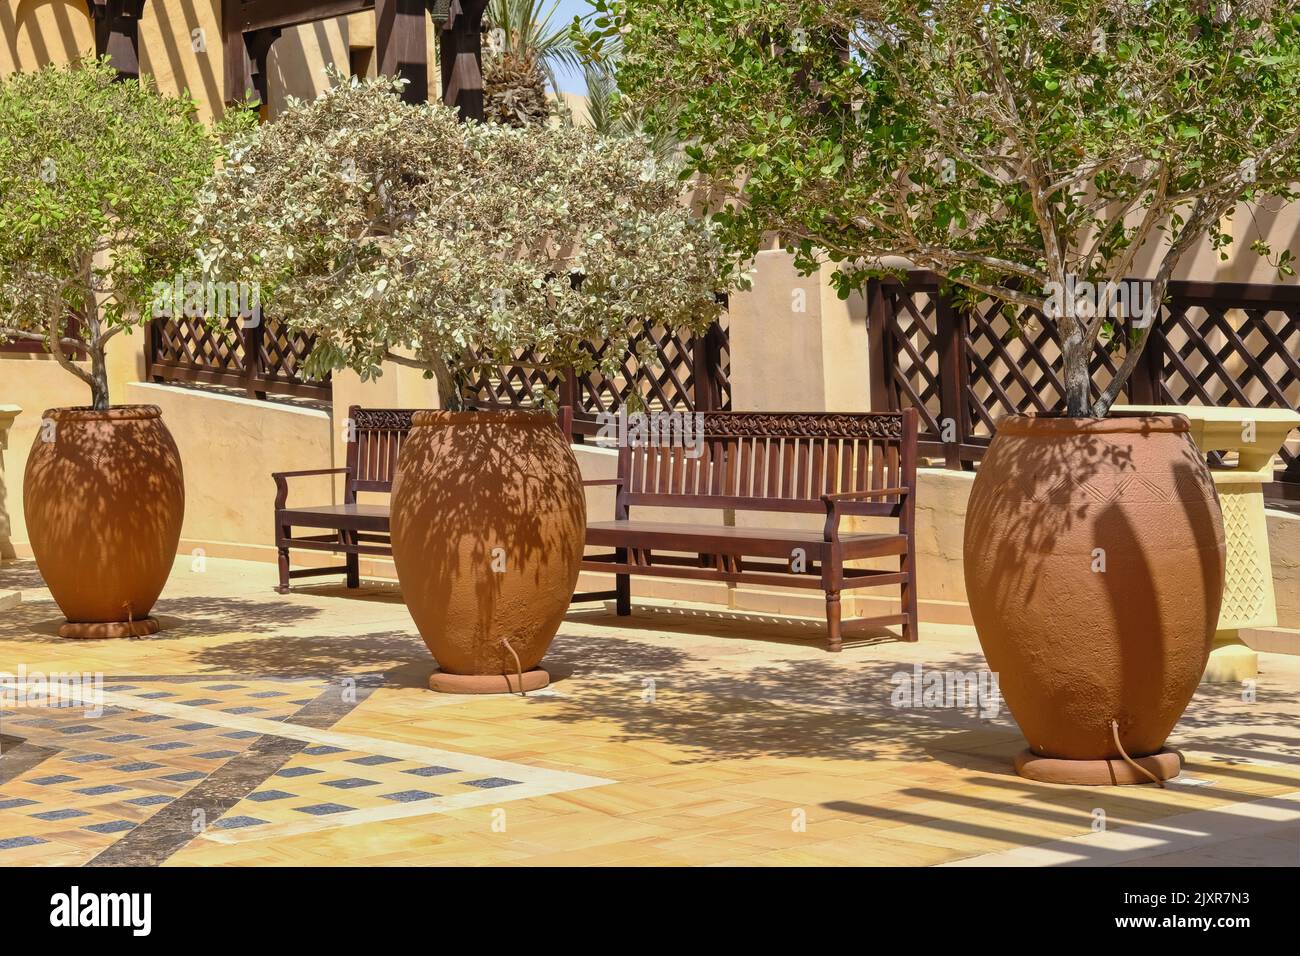 Orient ceramic floor vases with plants and wooden benches with carved arabesque floral pattern in courtyard of middle eastern villa or palace. Stock Photo